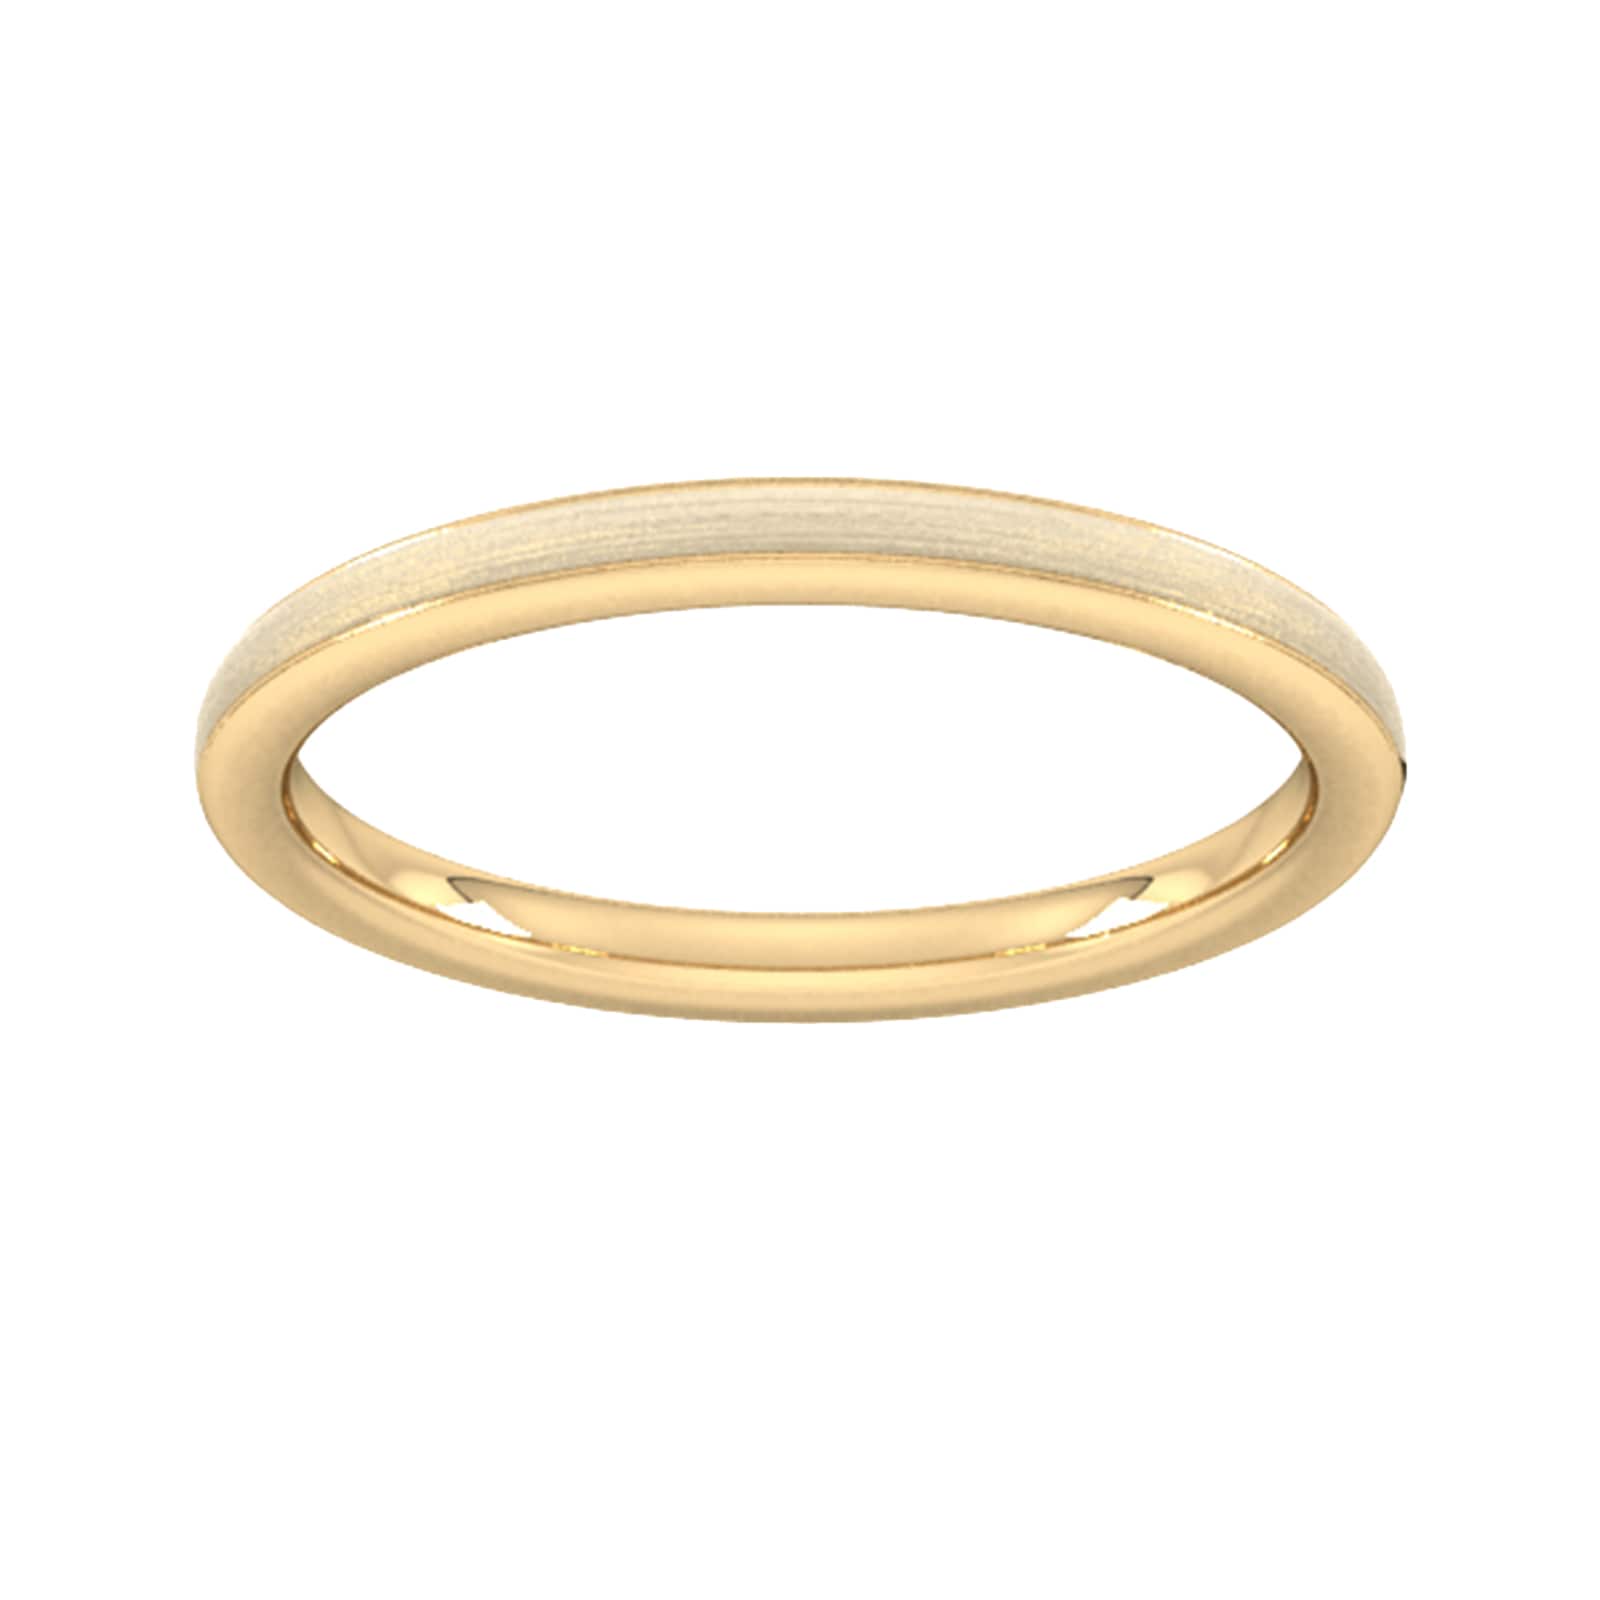 2mm Slight Court Standard Matt Centre With Grooves Wedding Ring In 18 Carat Yellow Gold - Ring Size V